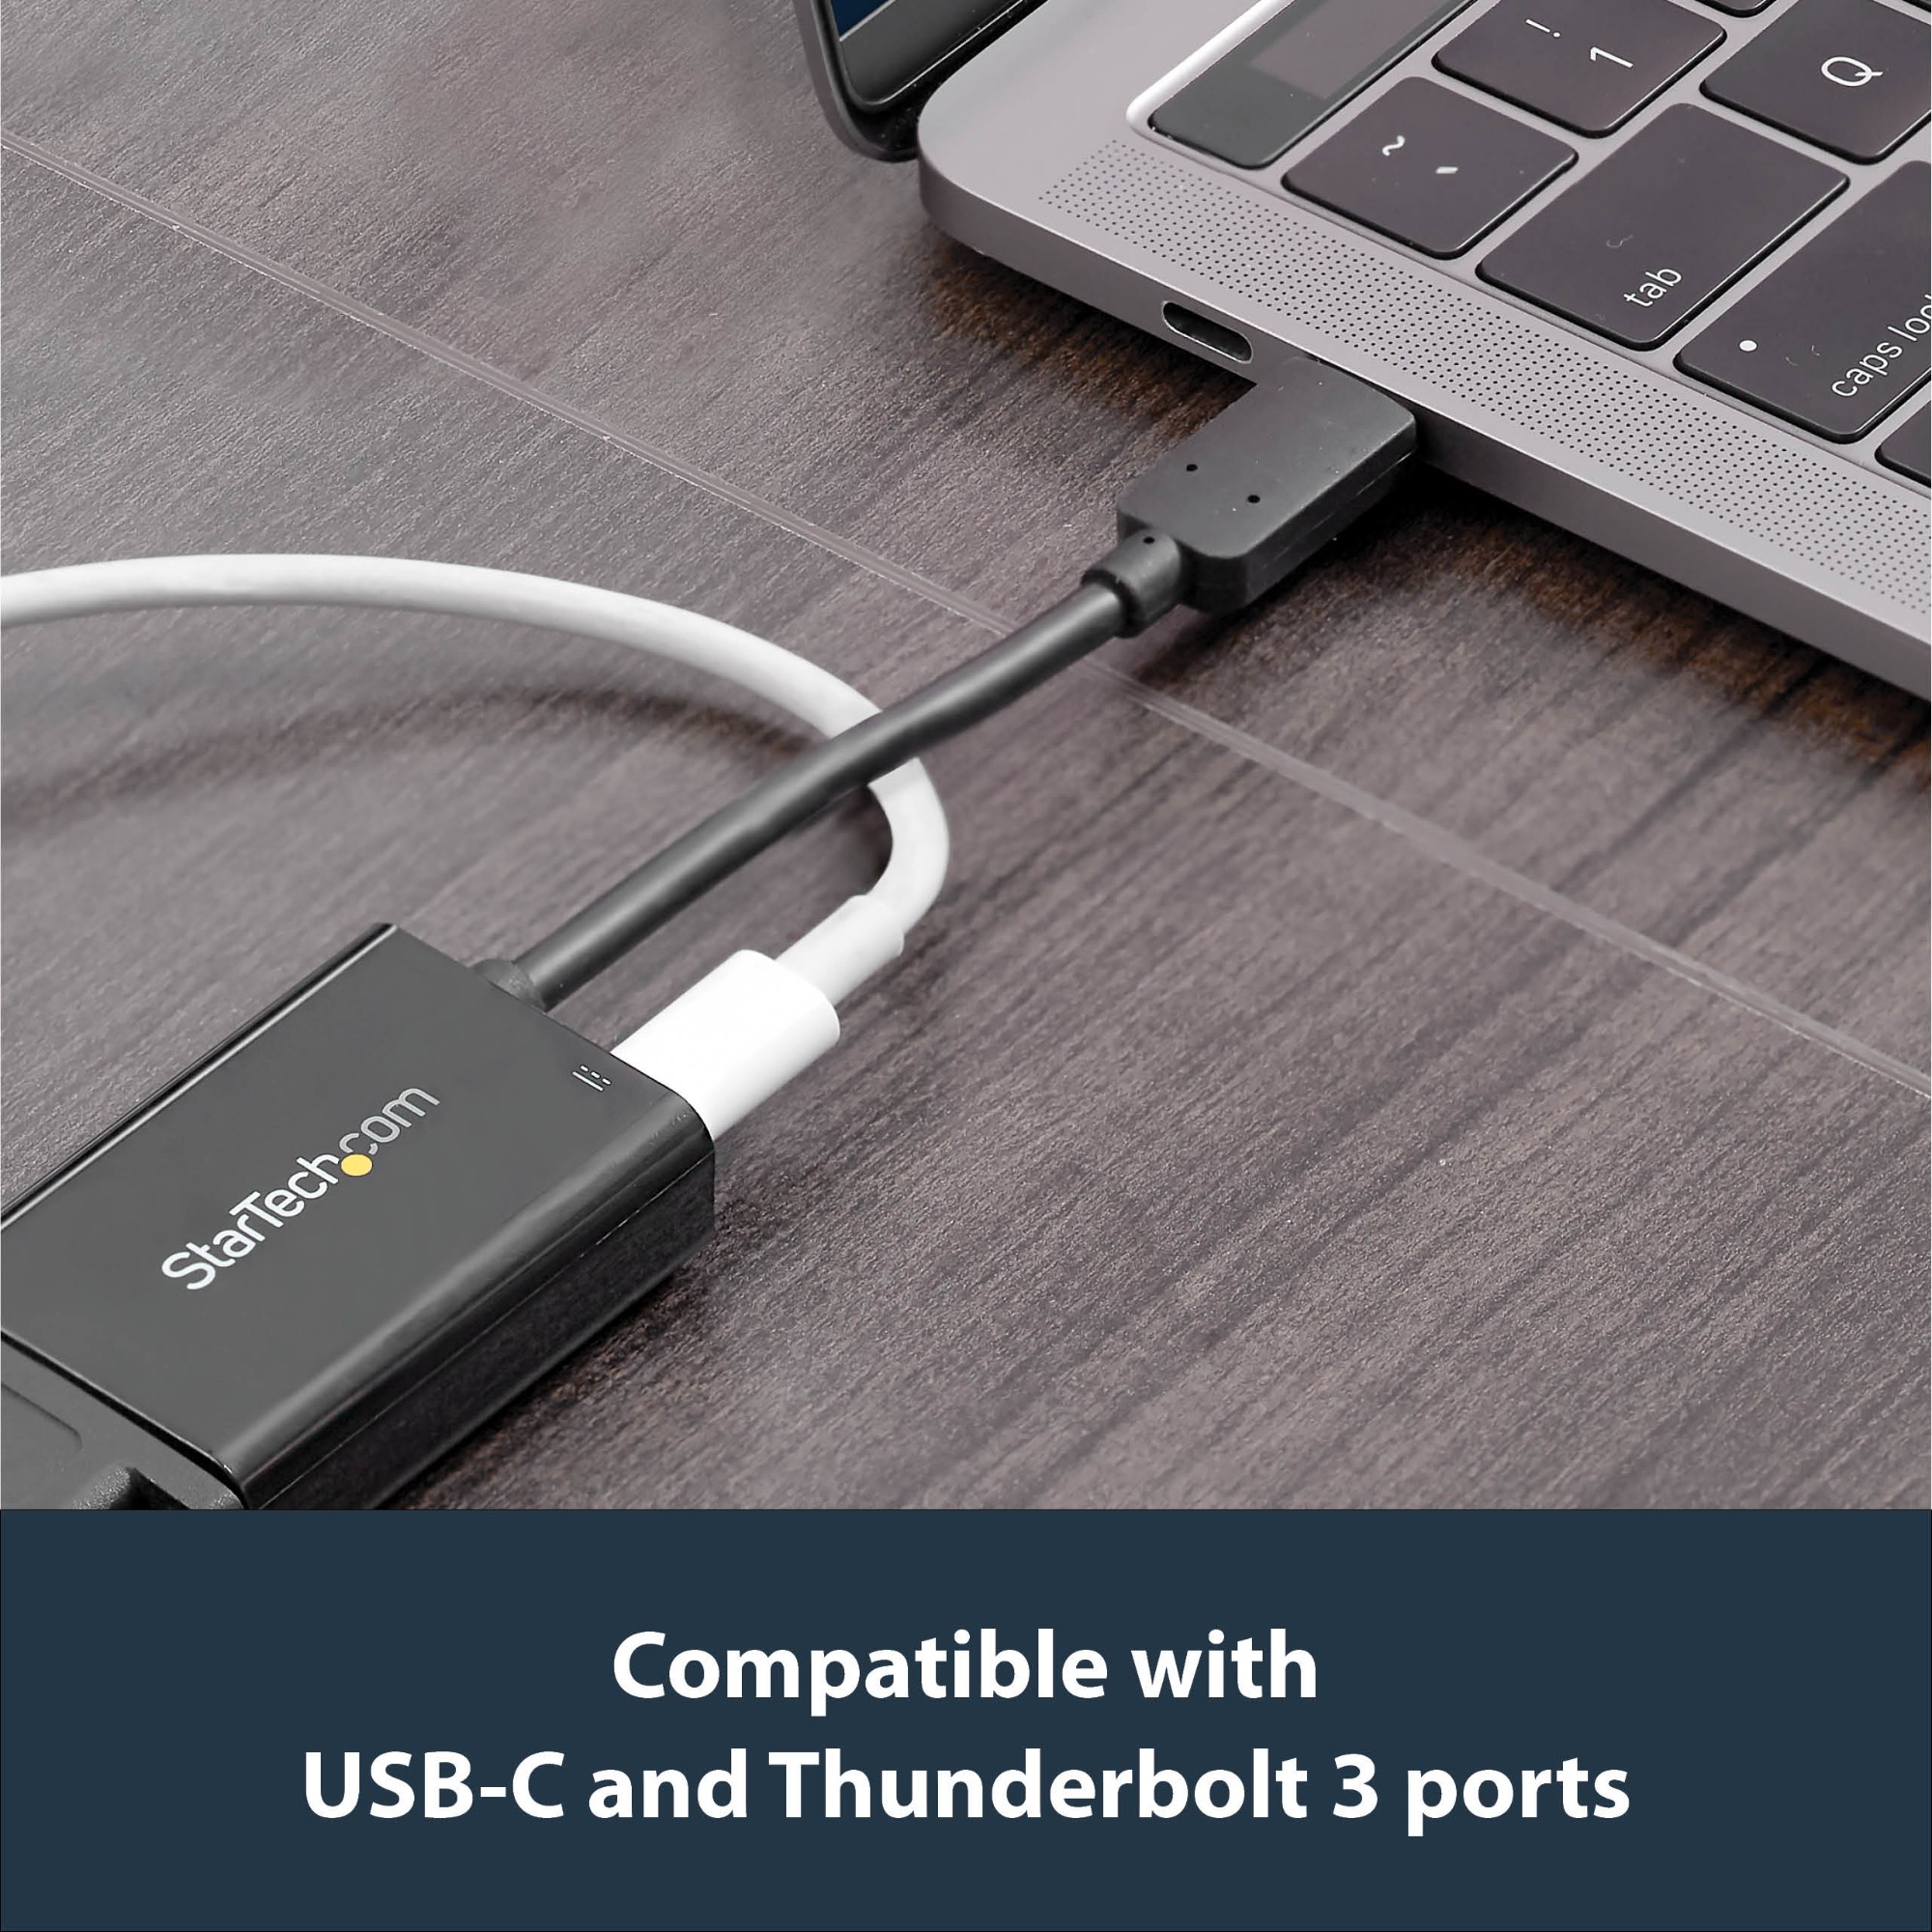 StarTech.com USB C to VGA Adapter with Power Delivery - 1080p USB Type-C to VGA Monitor Video Converter w/ Charging - 60W PD Pass-Through - Thunderbolt 3 Compatible - Black